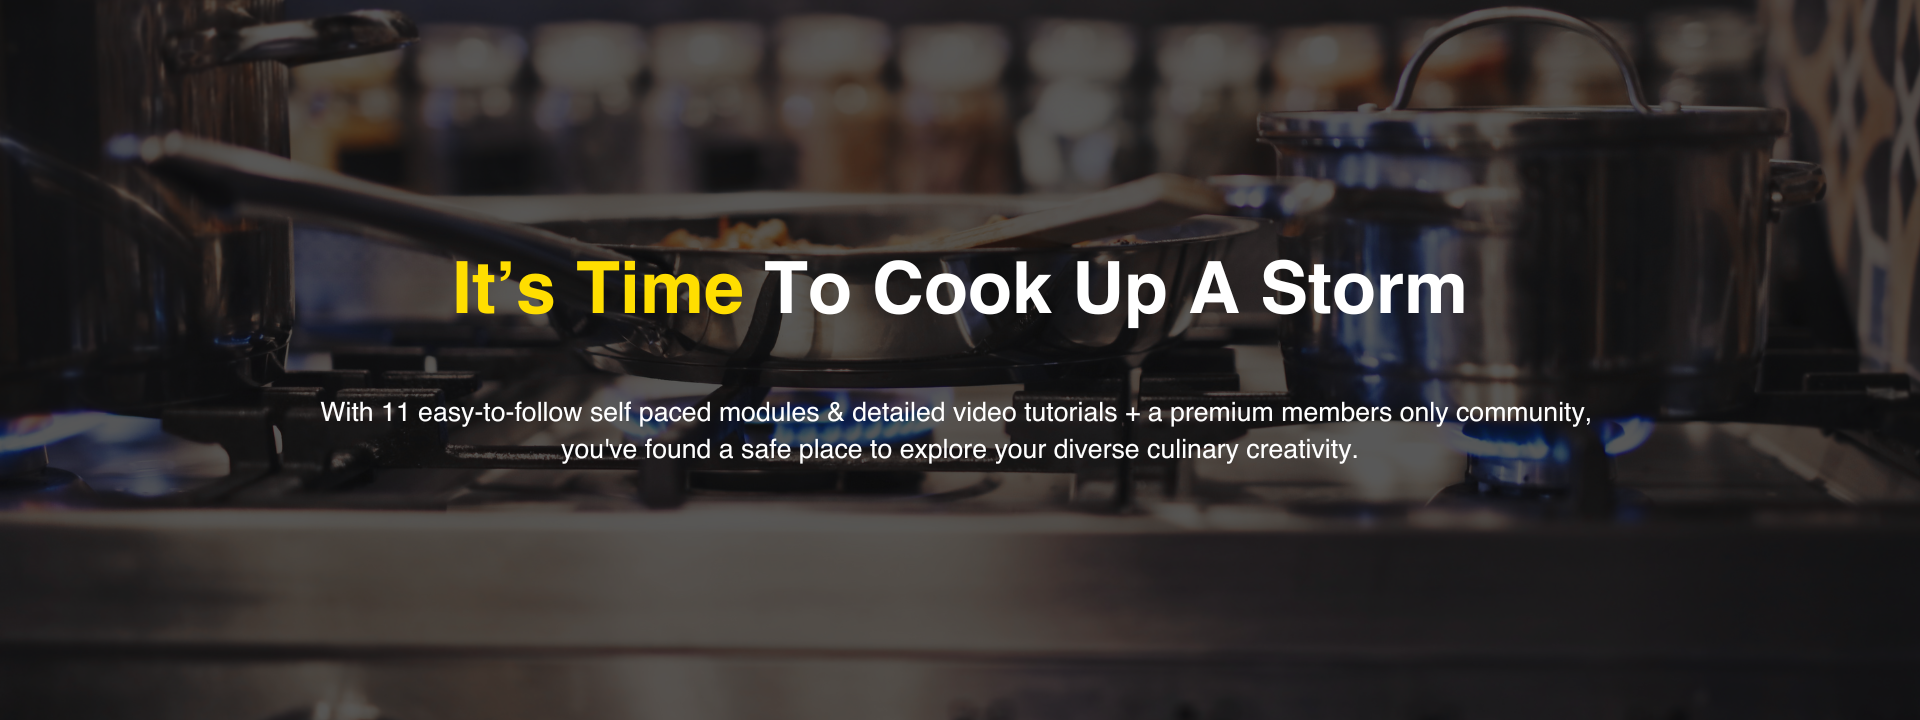 It’s Time To Cook Up A Storm